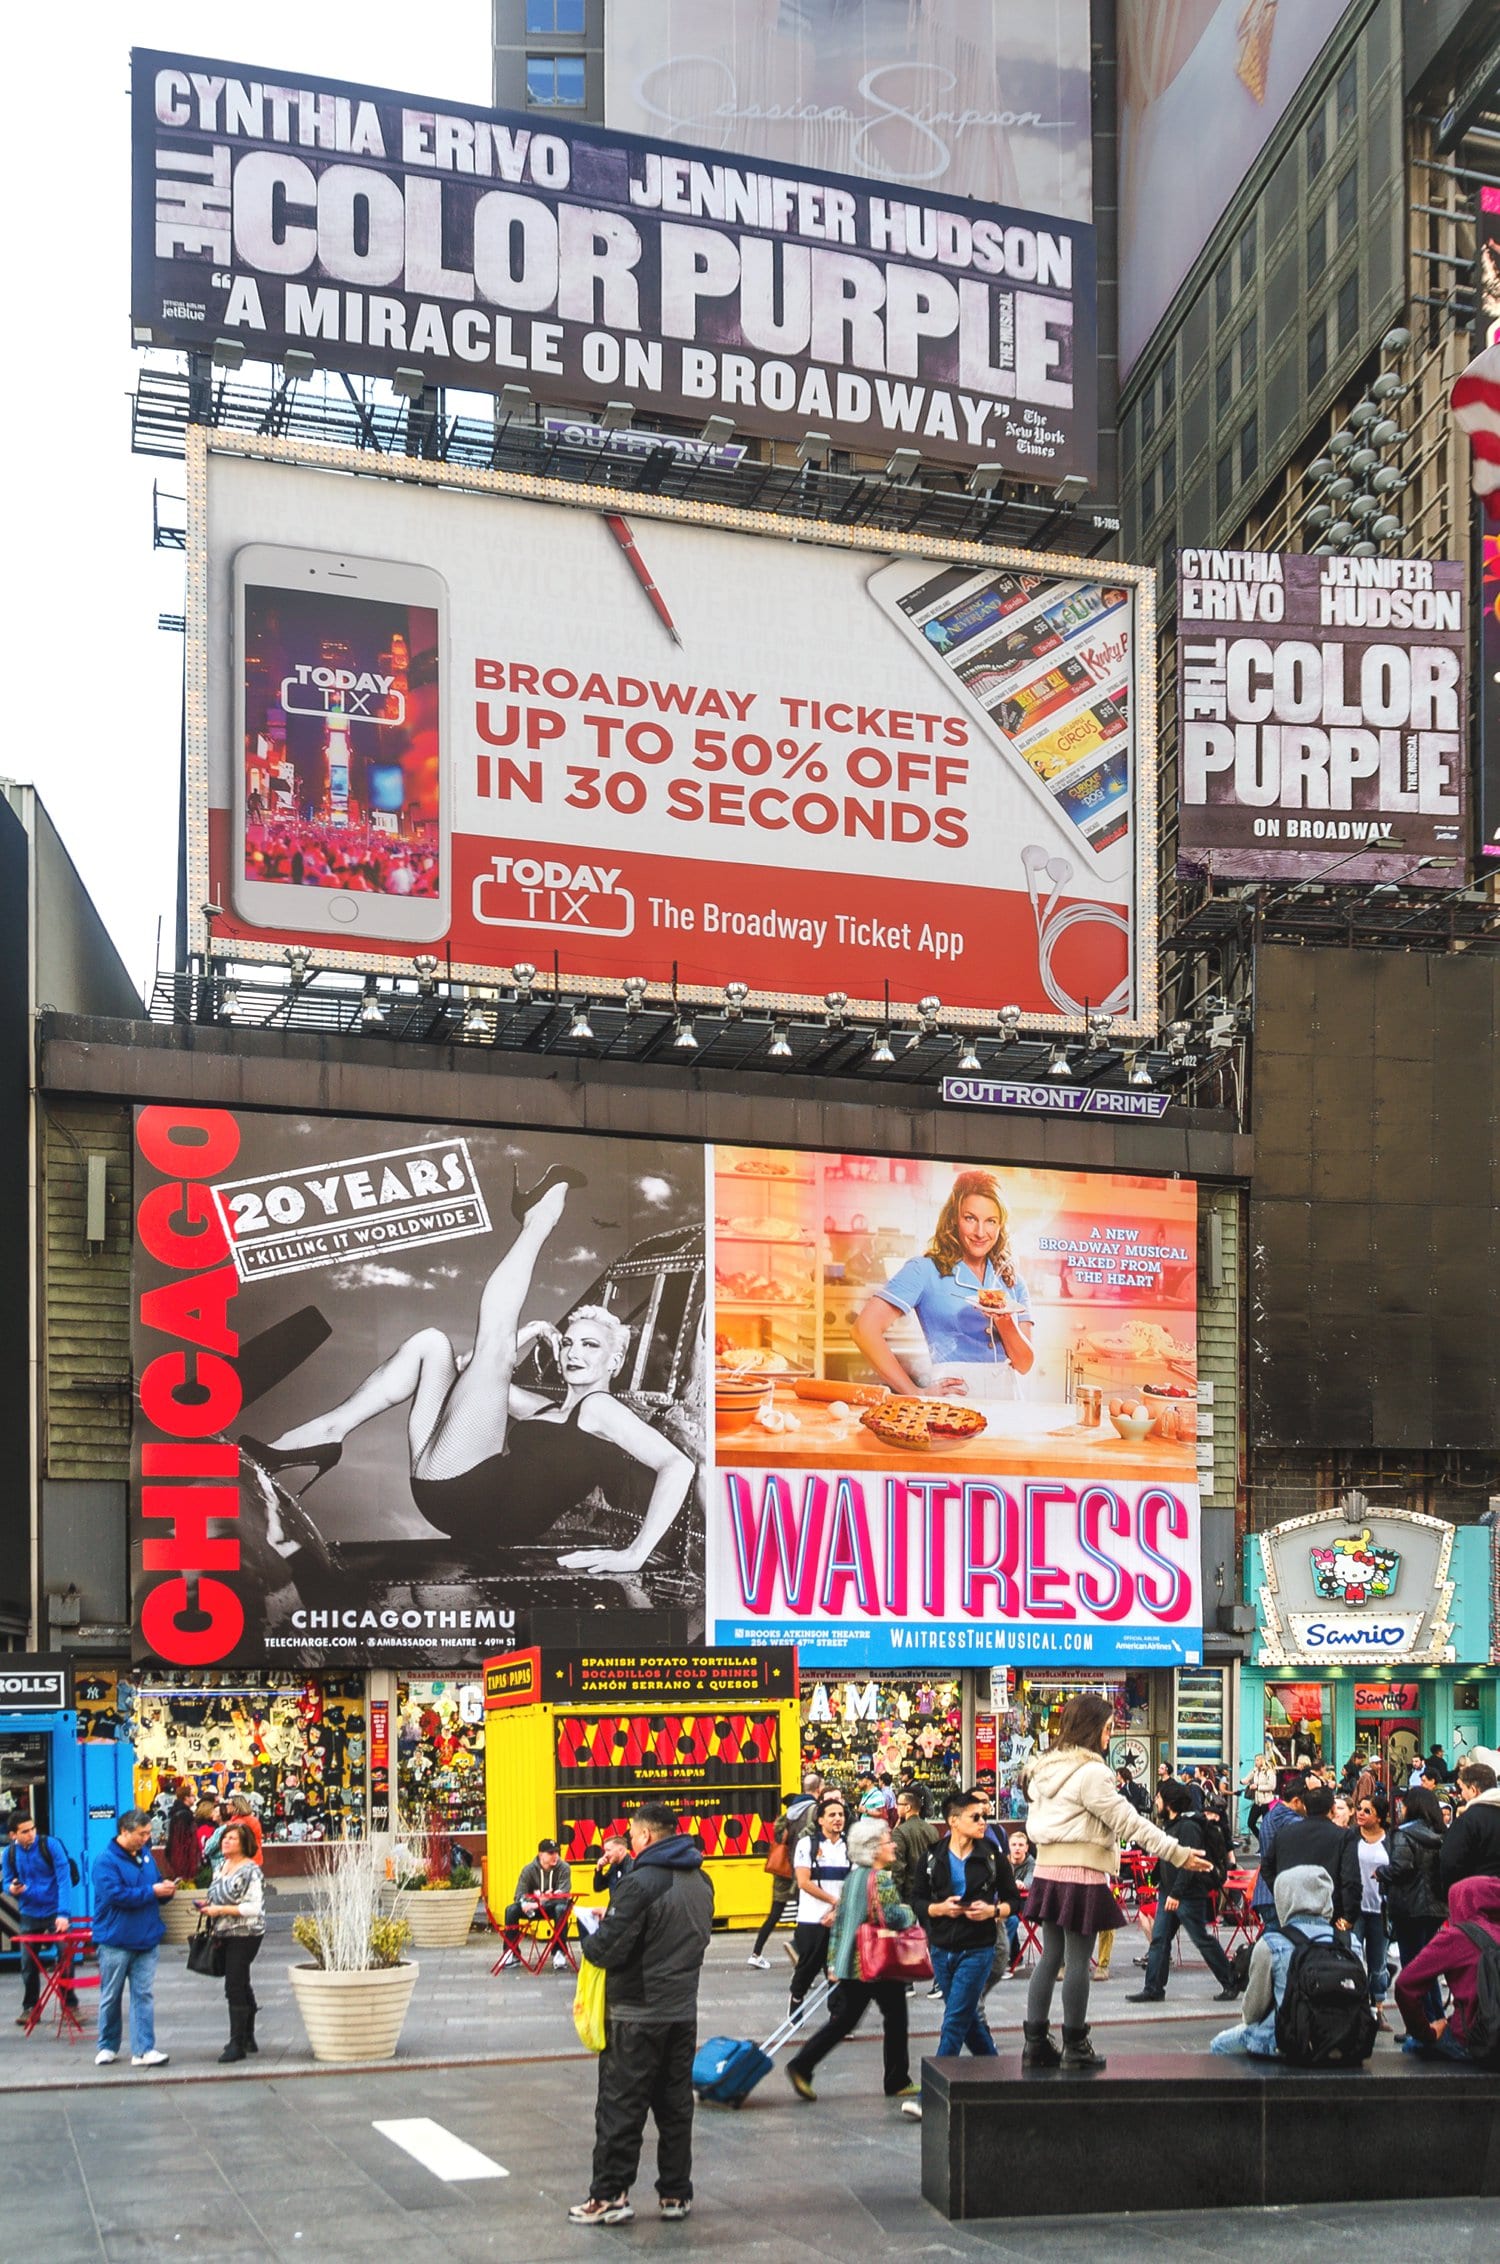 We can install Billboards for businesses and events in NYC